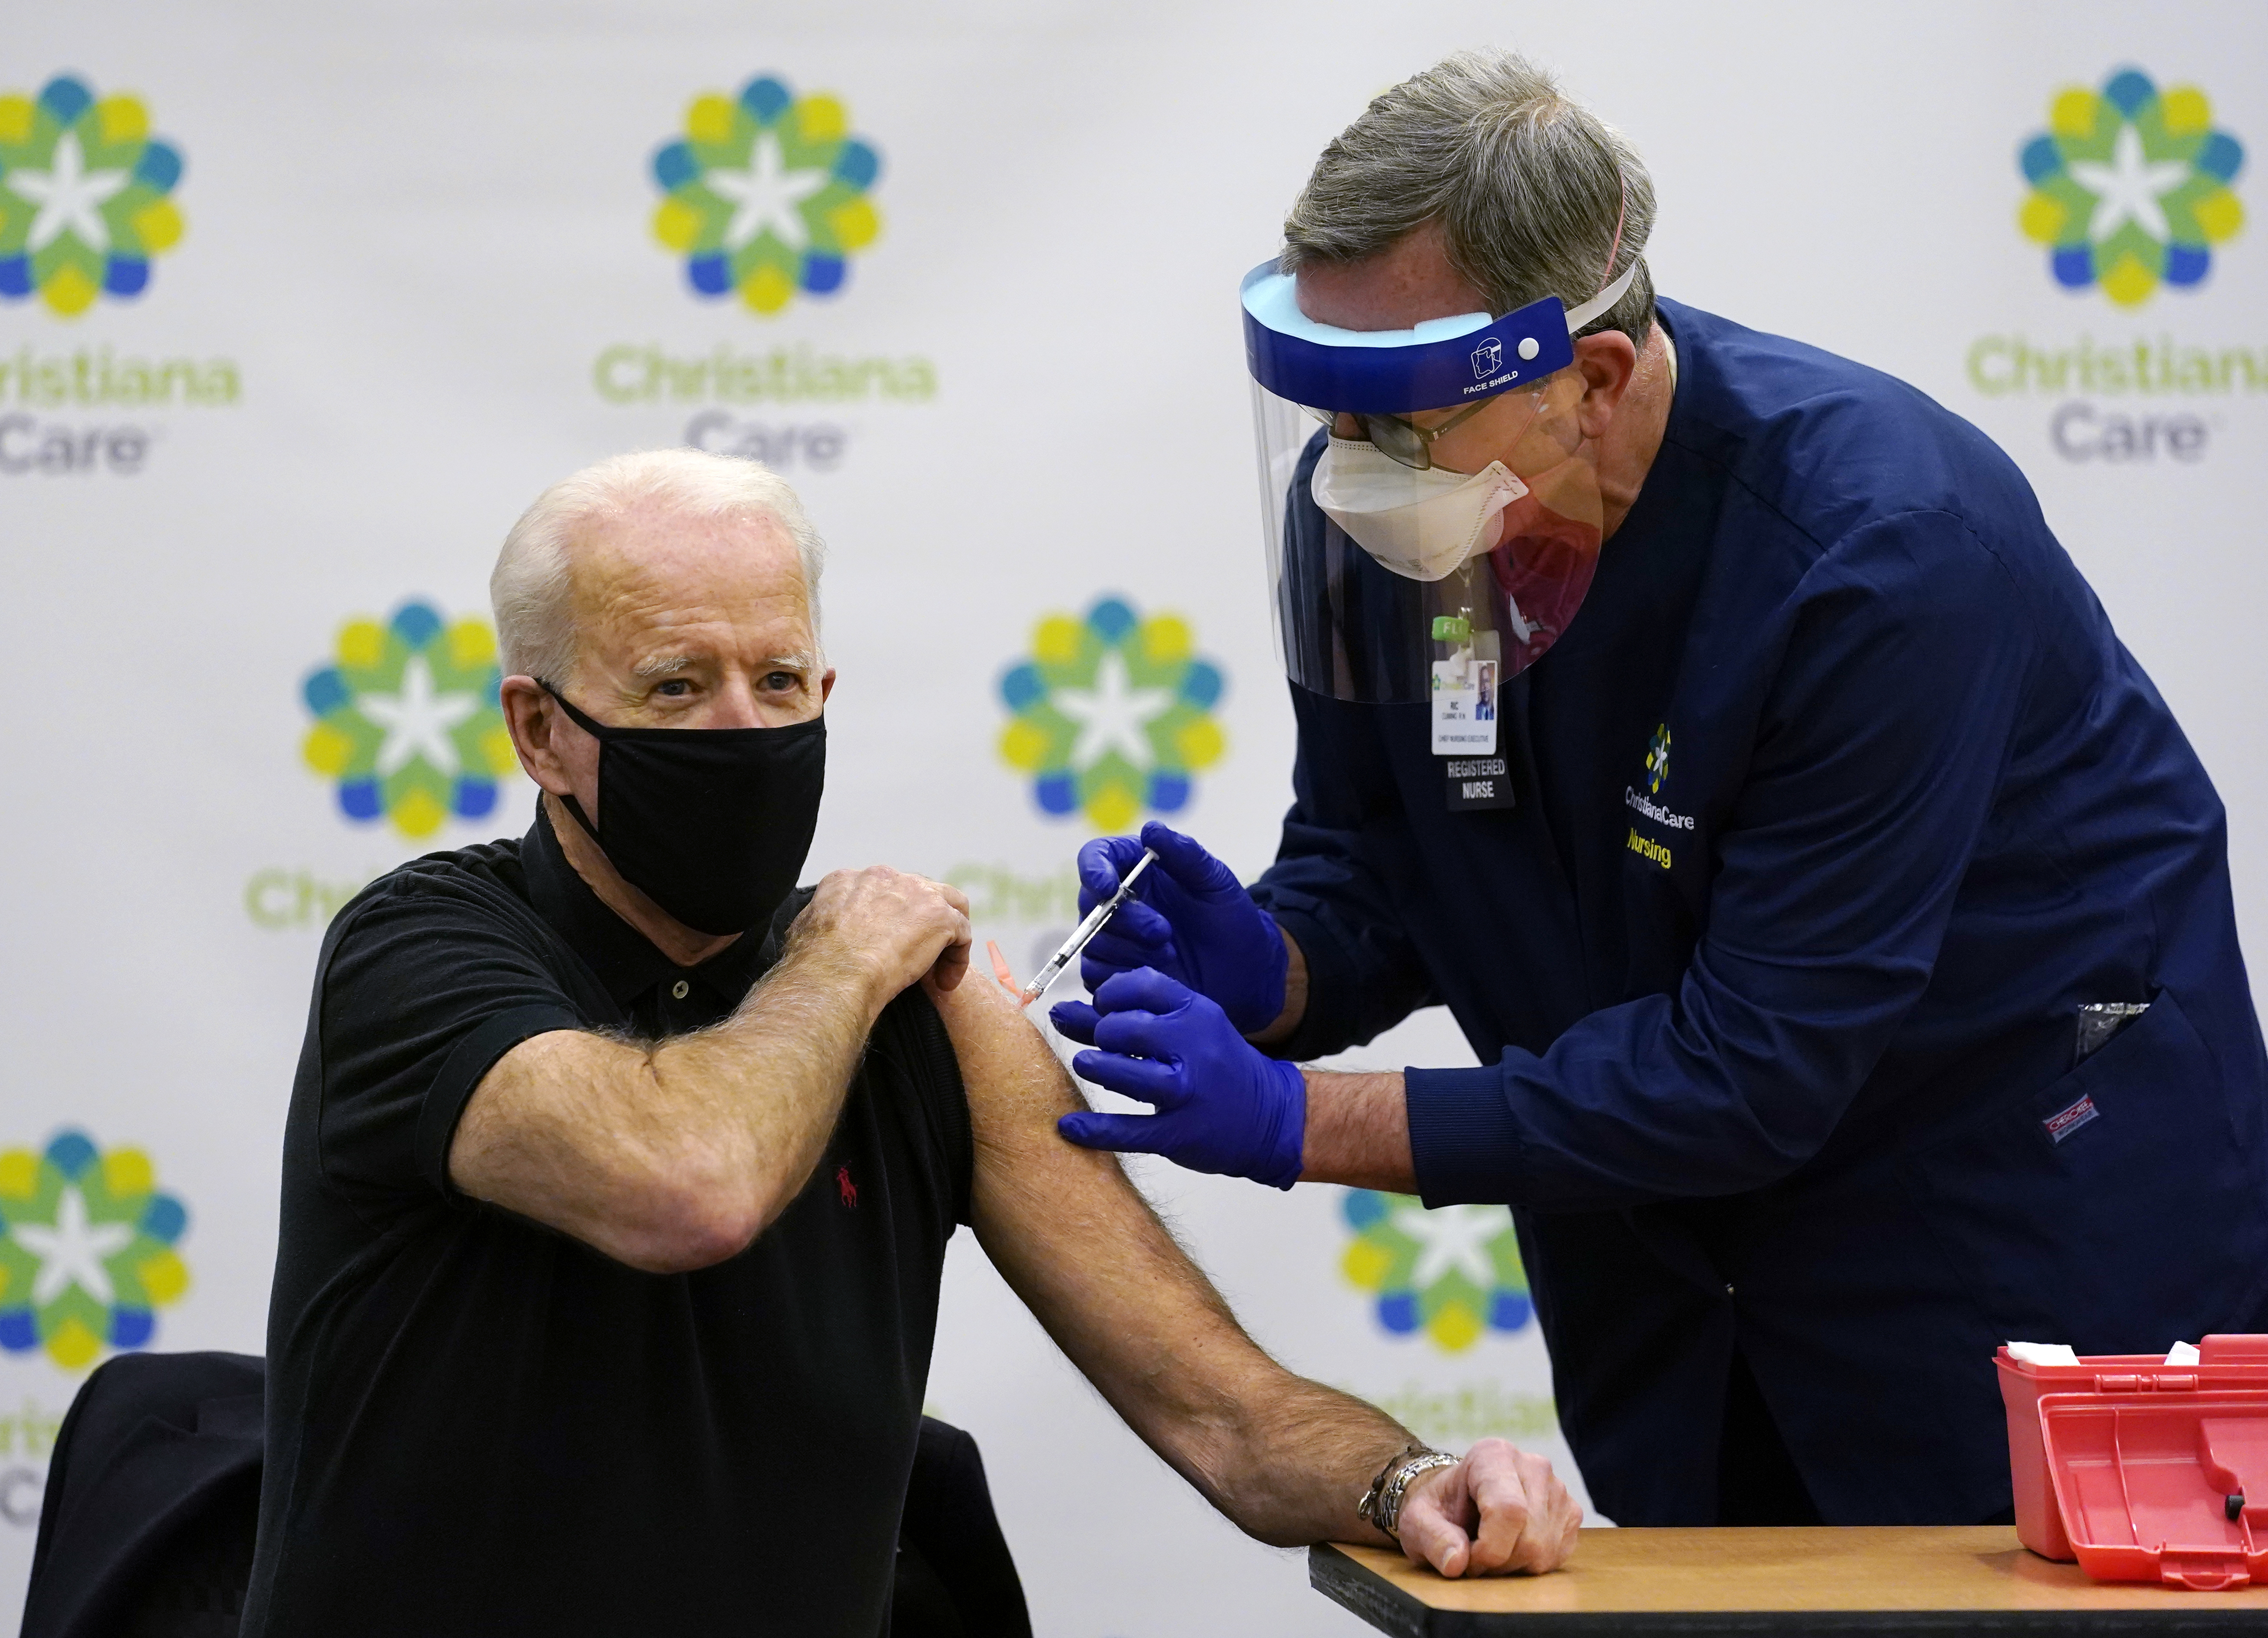 President-elect Joe Biden receives his second dose of the coronavirus vaccine at ChristianaCare Christiana Hospital in Newark, Del., Monday, Jan. 11, 2021. The vaccine is being administered by Chief Nurse Executive Ric Cuming. Photo: AP